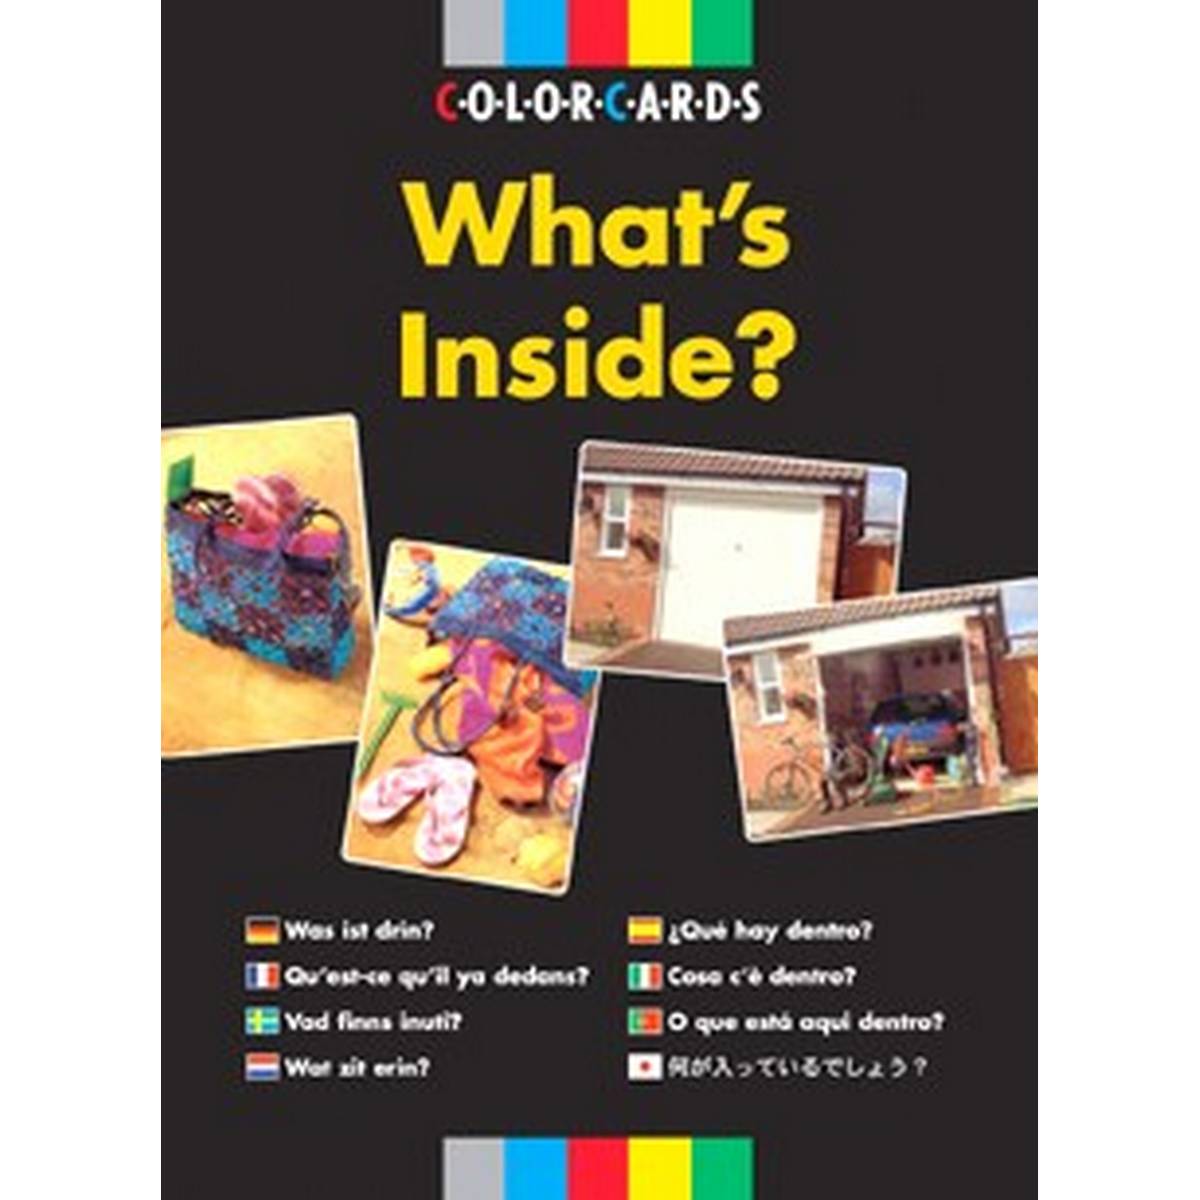 ColorCards: What's Inside?